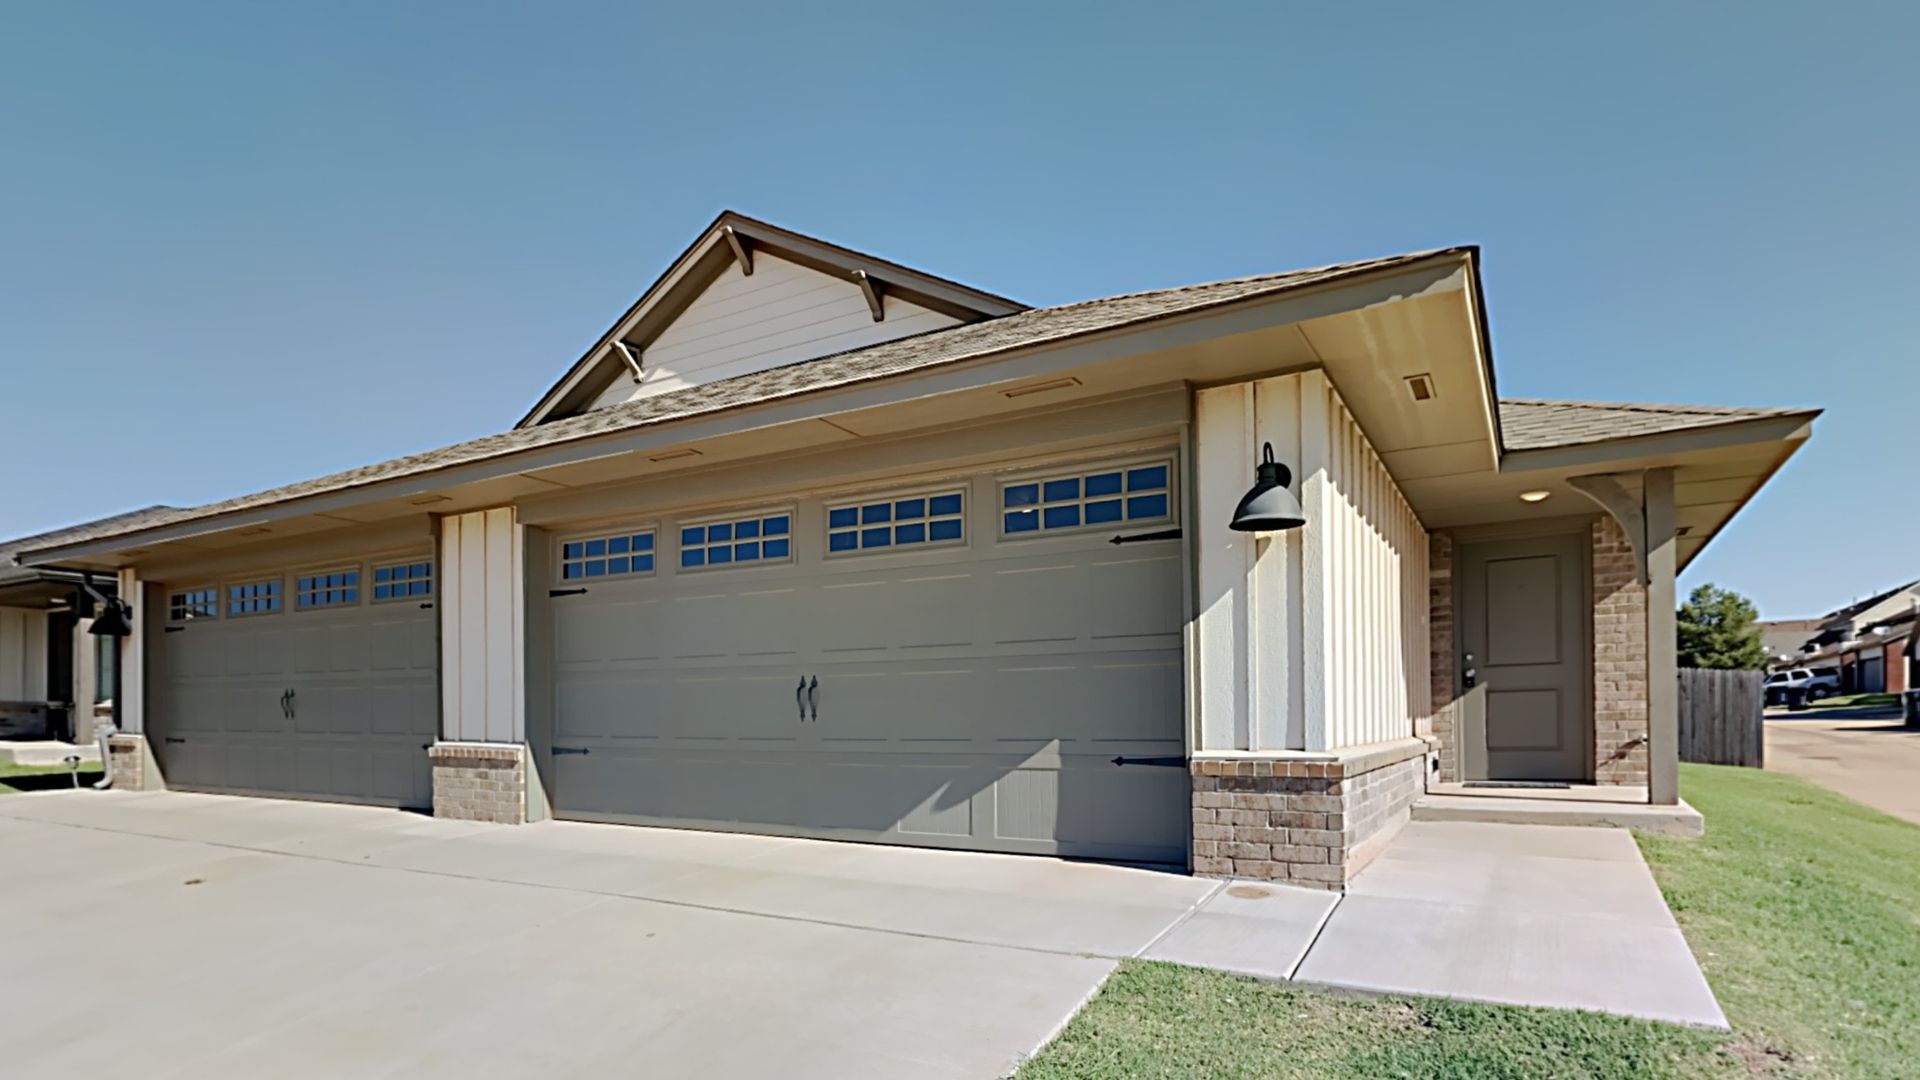 2 Bedroom 2 Bathroom 2 Car Garage Duplex Close to Broadway Extension, a short distance from Edmond and easy access to downtown OKC